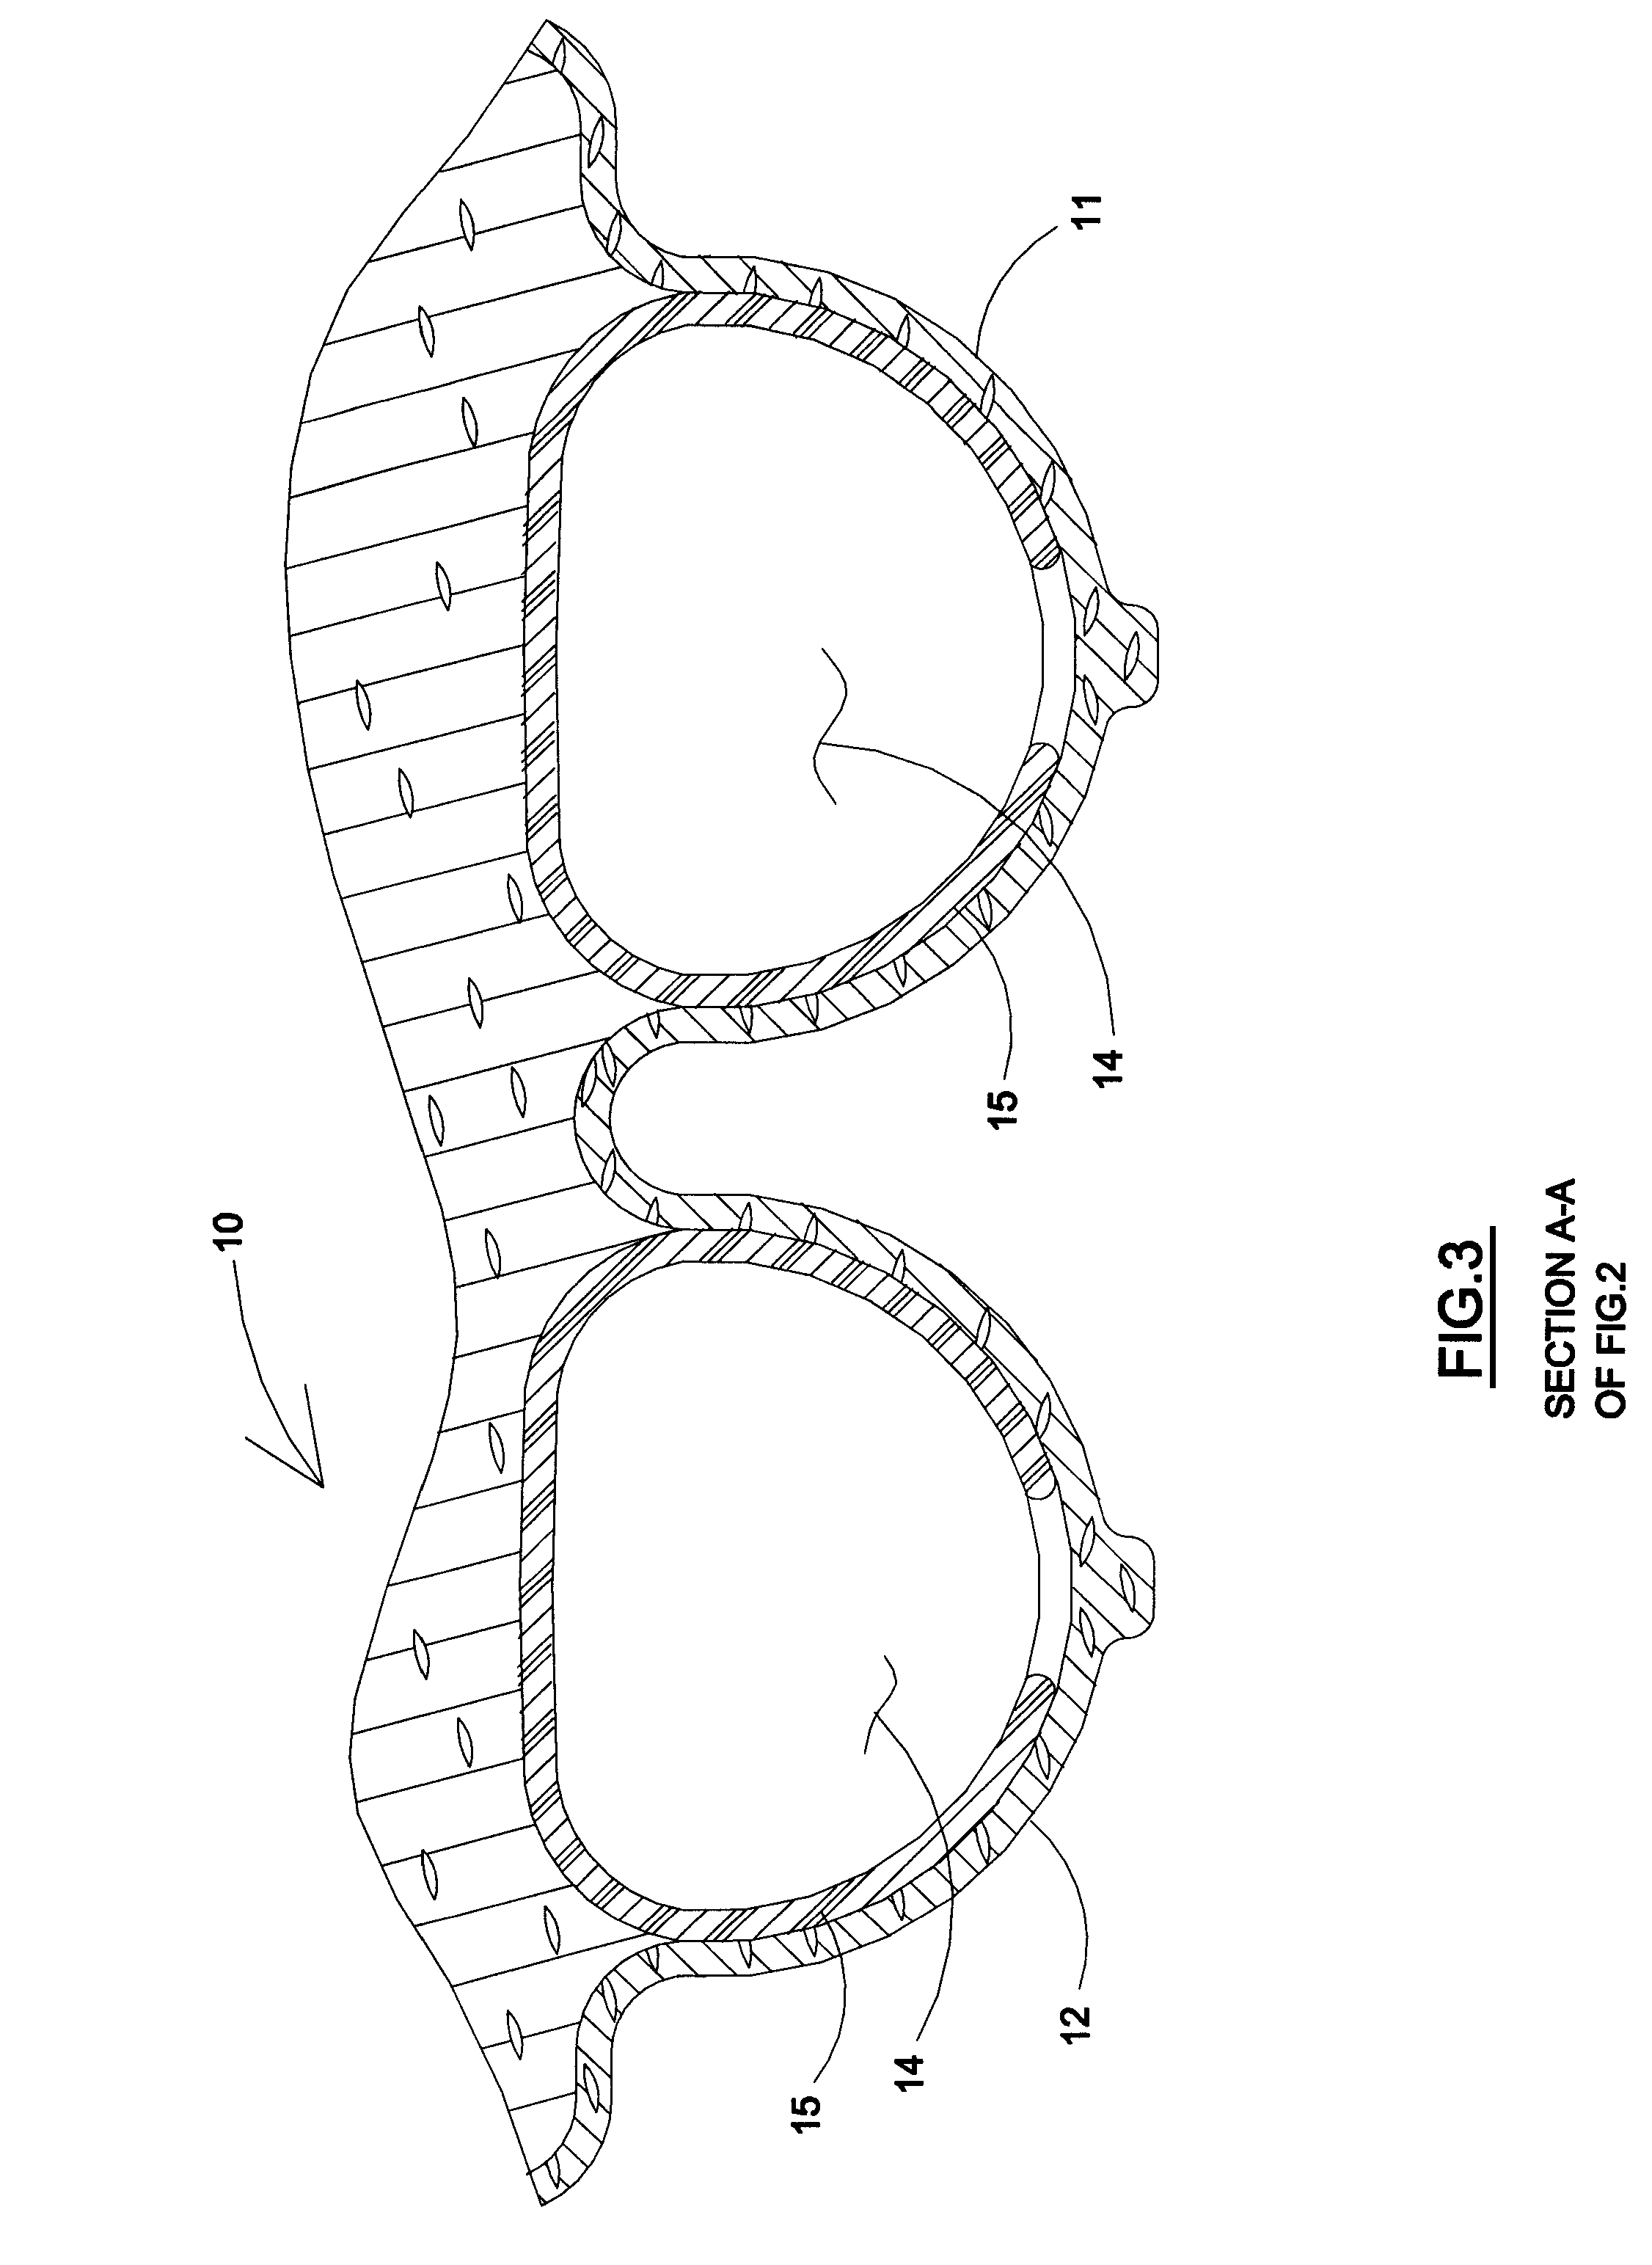 Method of treating capsular contracture